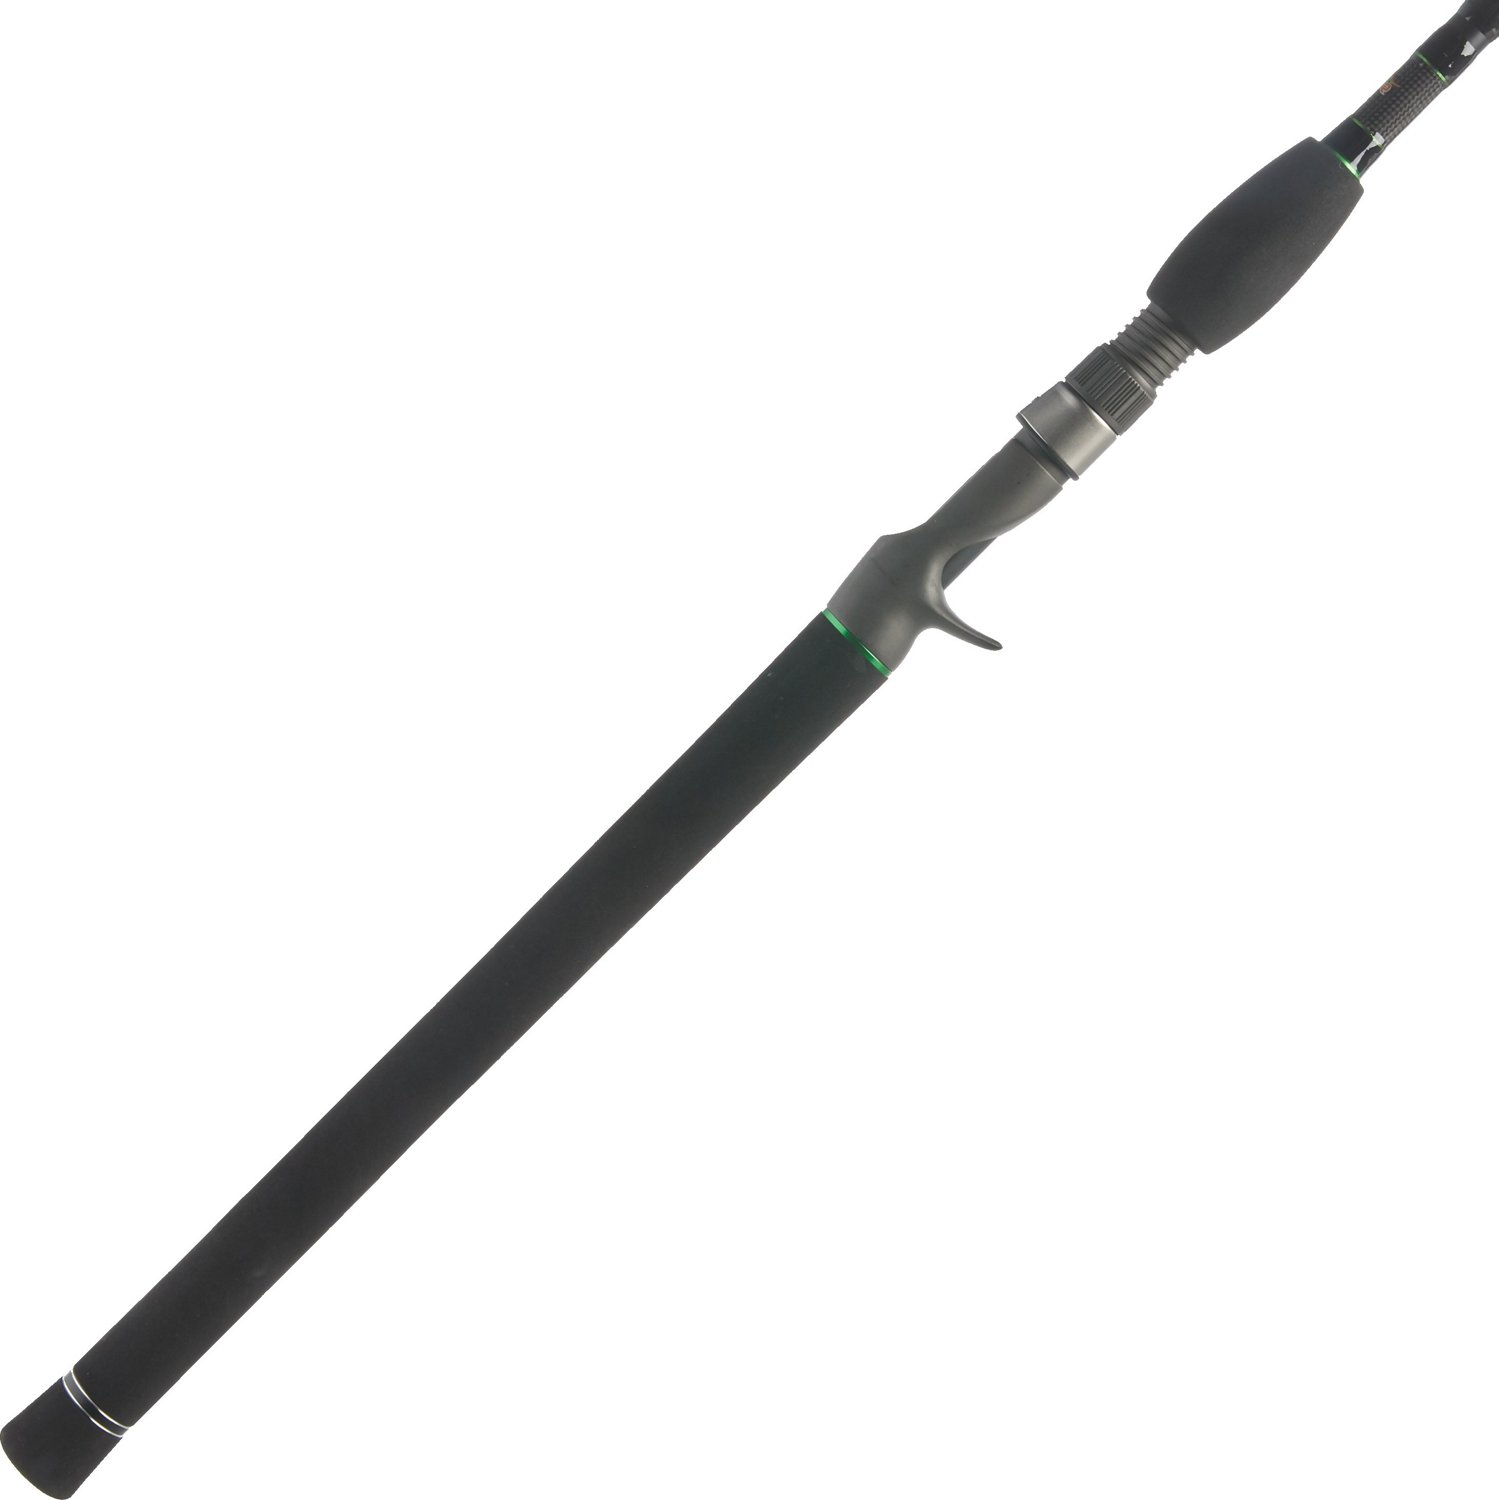 Dobyns Rods Fury Series Casting Rod